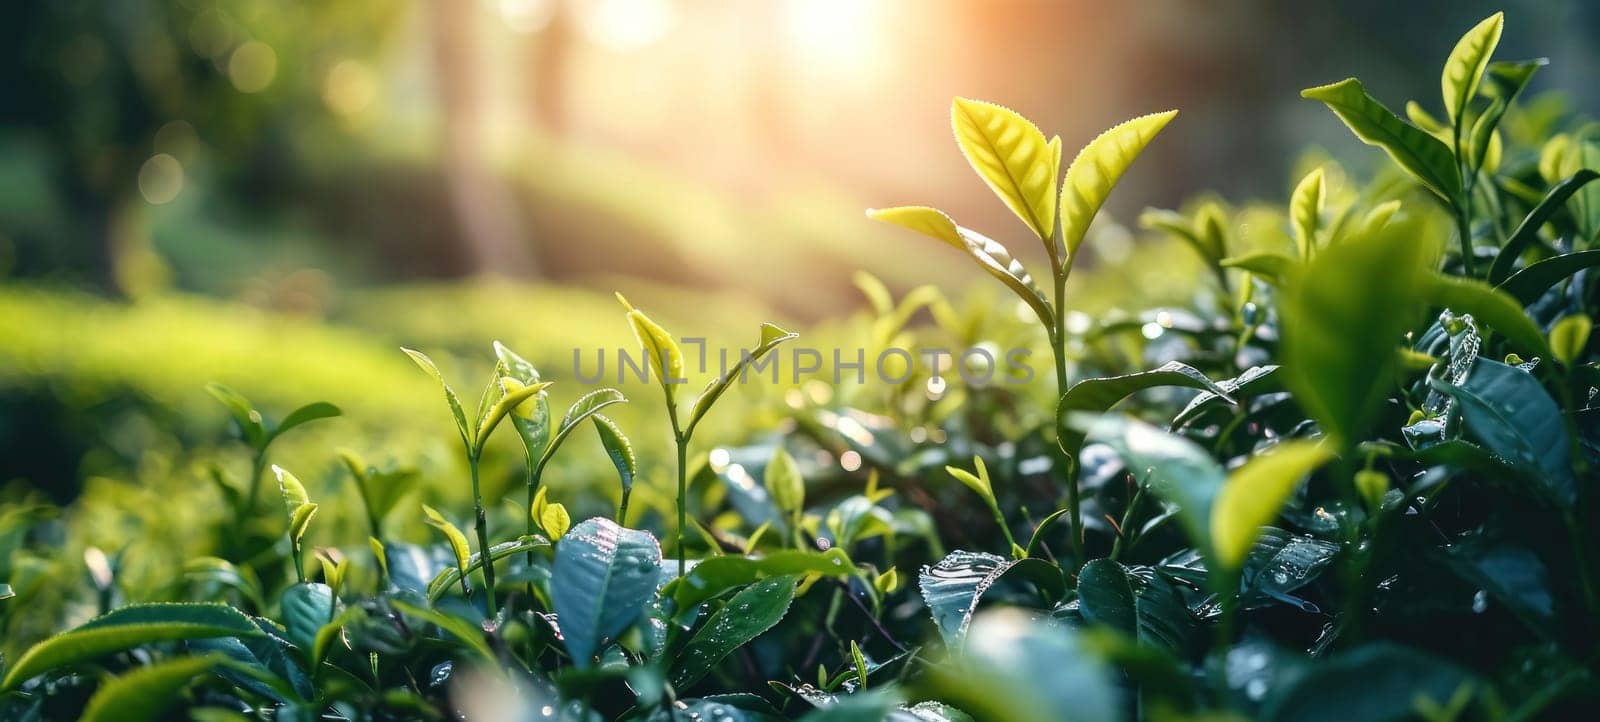 Sunrise casting a warm glow over the verdant slopes of a tea plantation, highlighting the fresh green leaves.